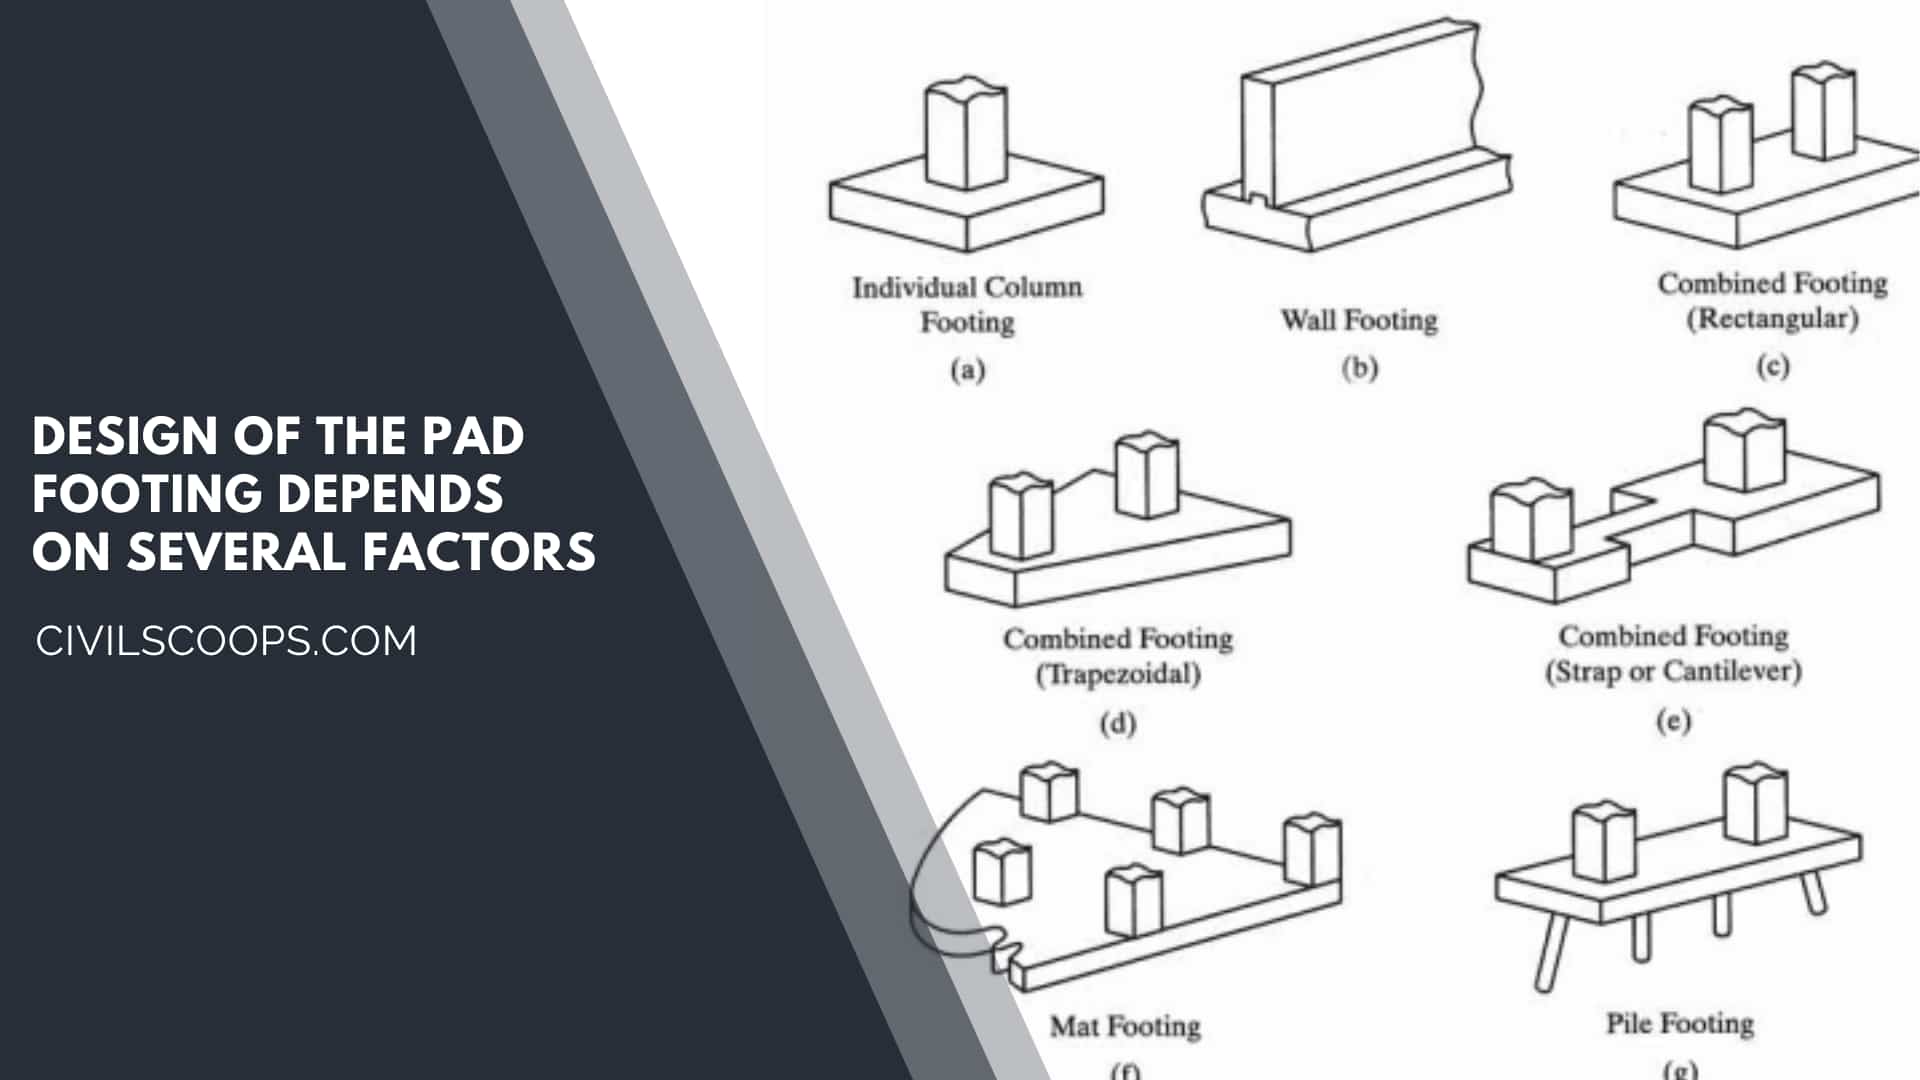 Design of the Pad Footing Depends on Several Factors